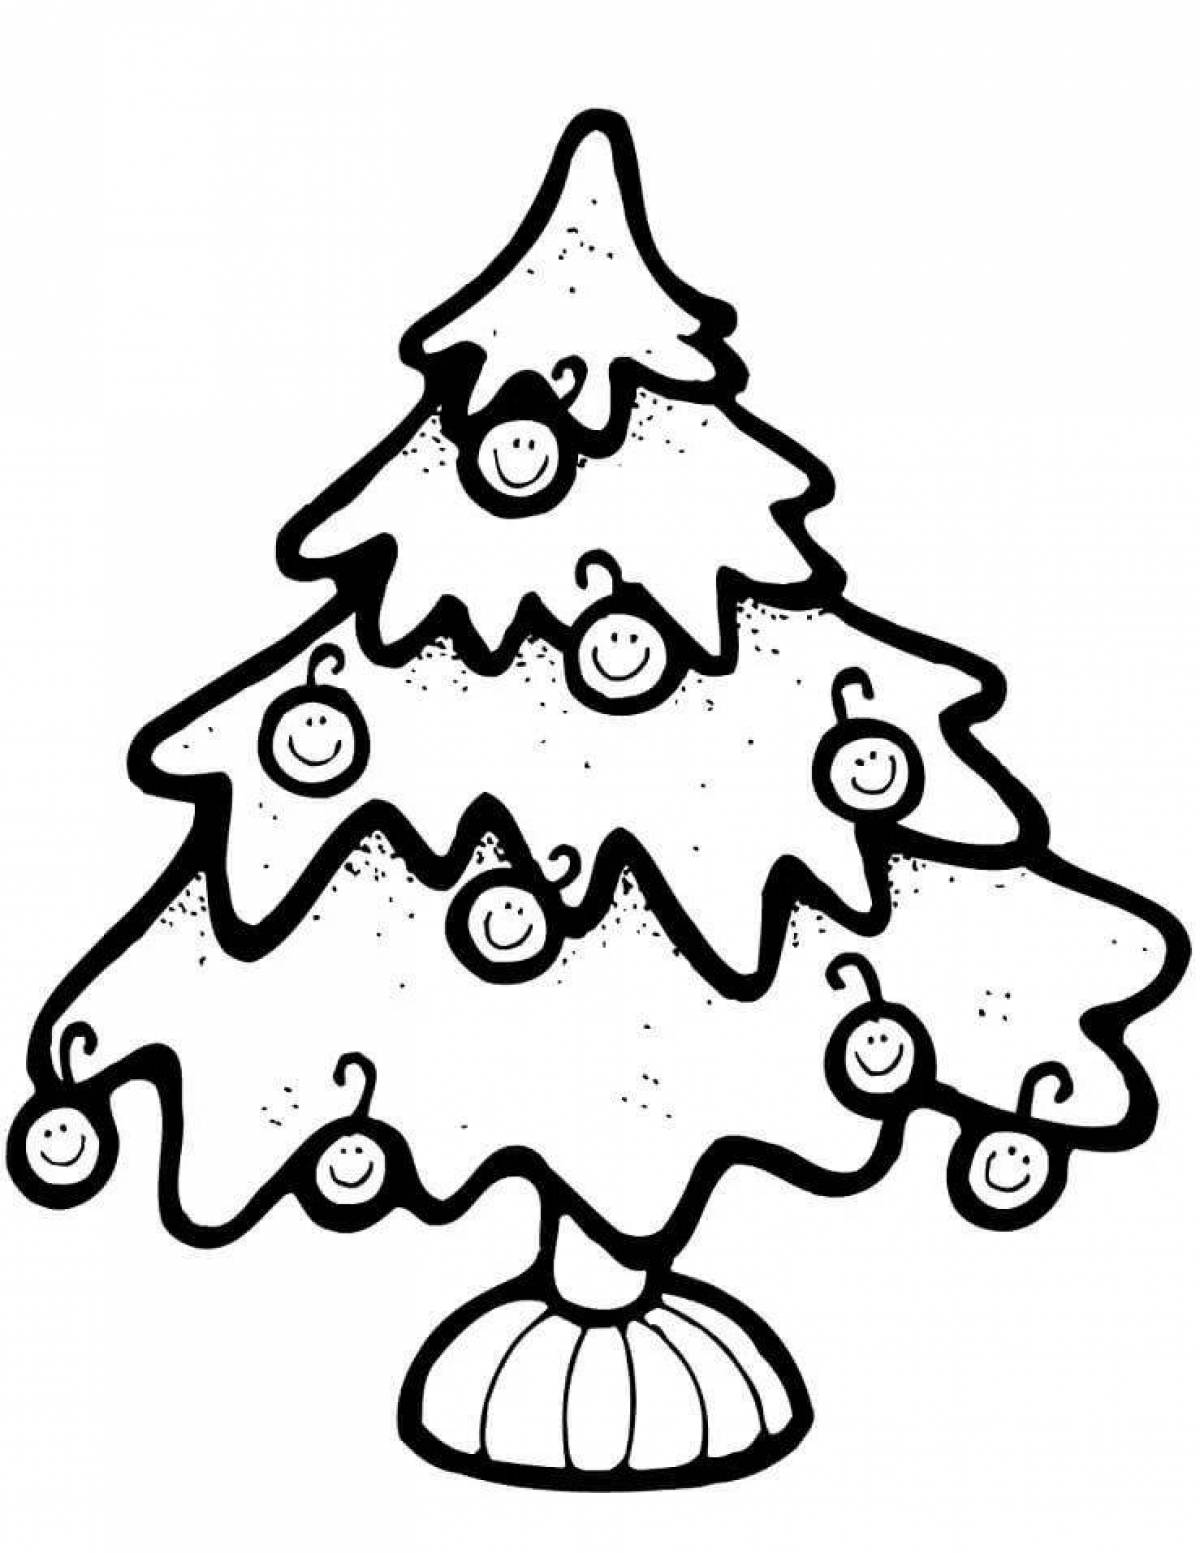 Fine Christmas tree coloring page